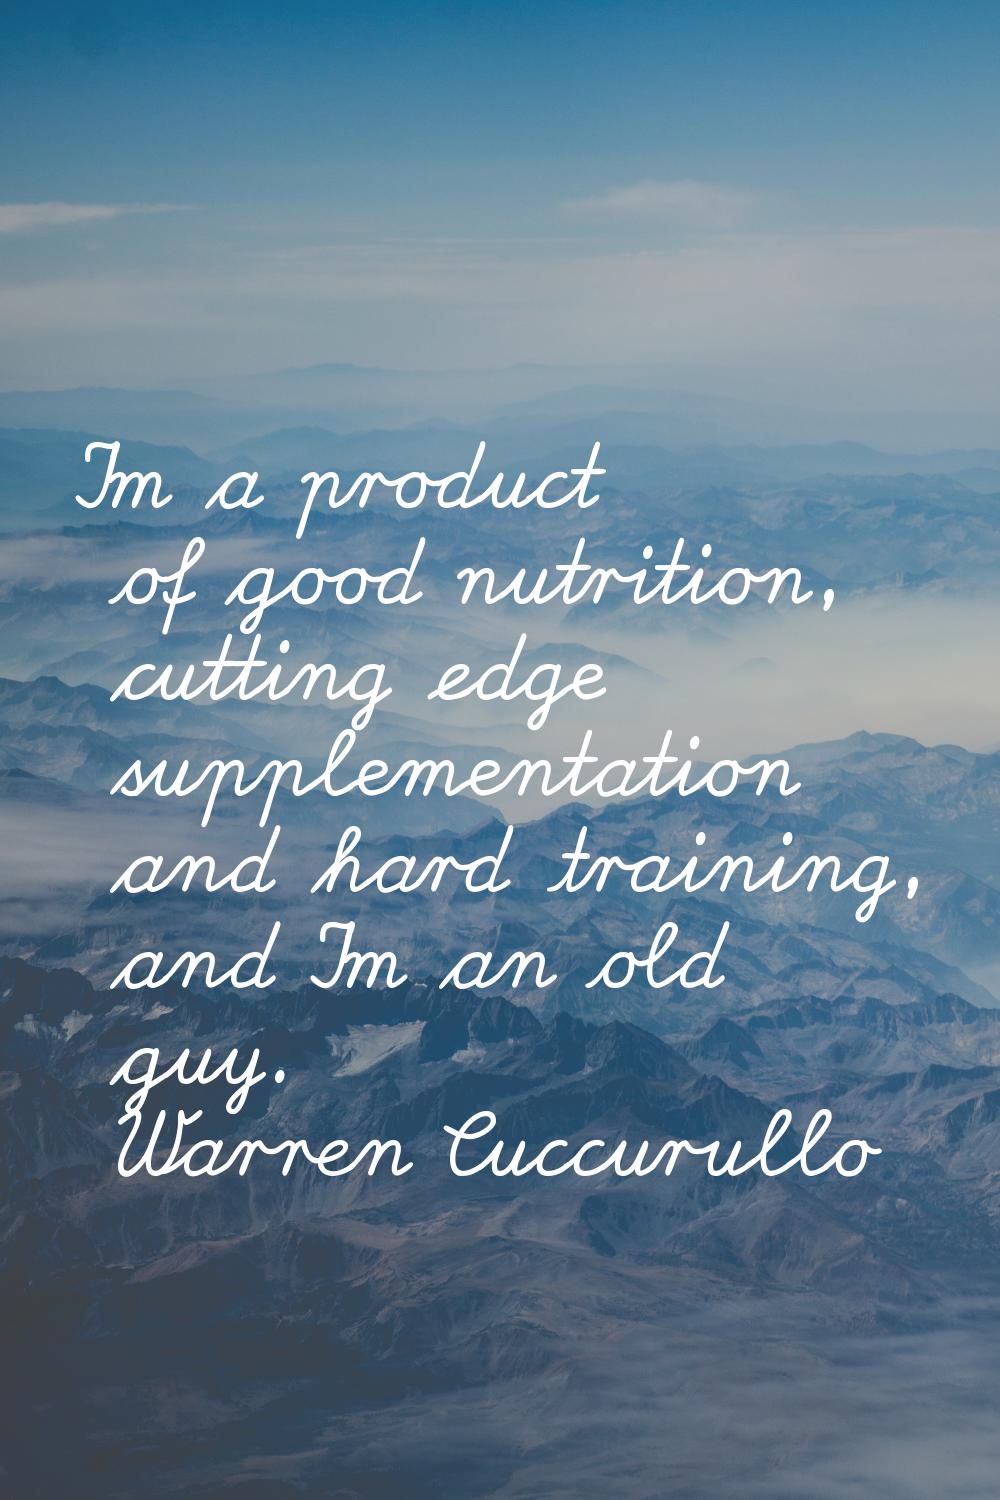 I'm a product of good nutrition, cutting edge supplementation and hard training, and I'm an old guy